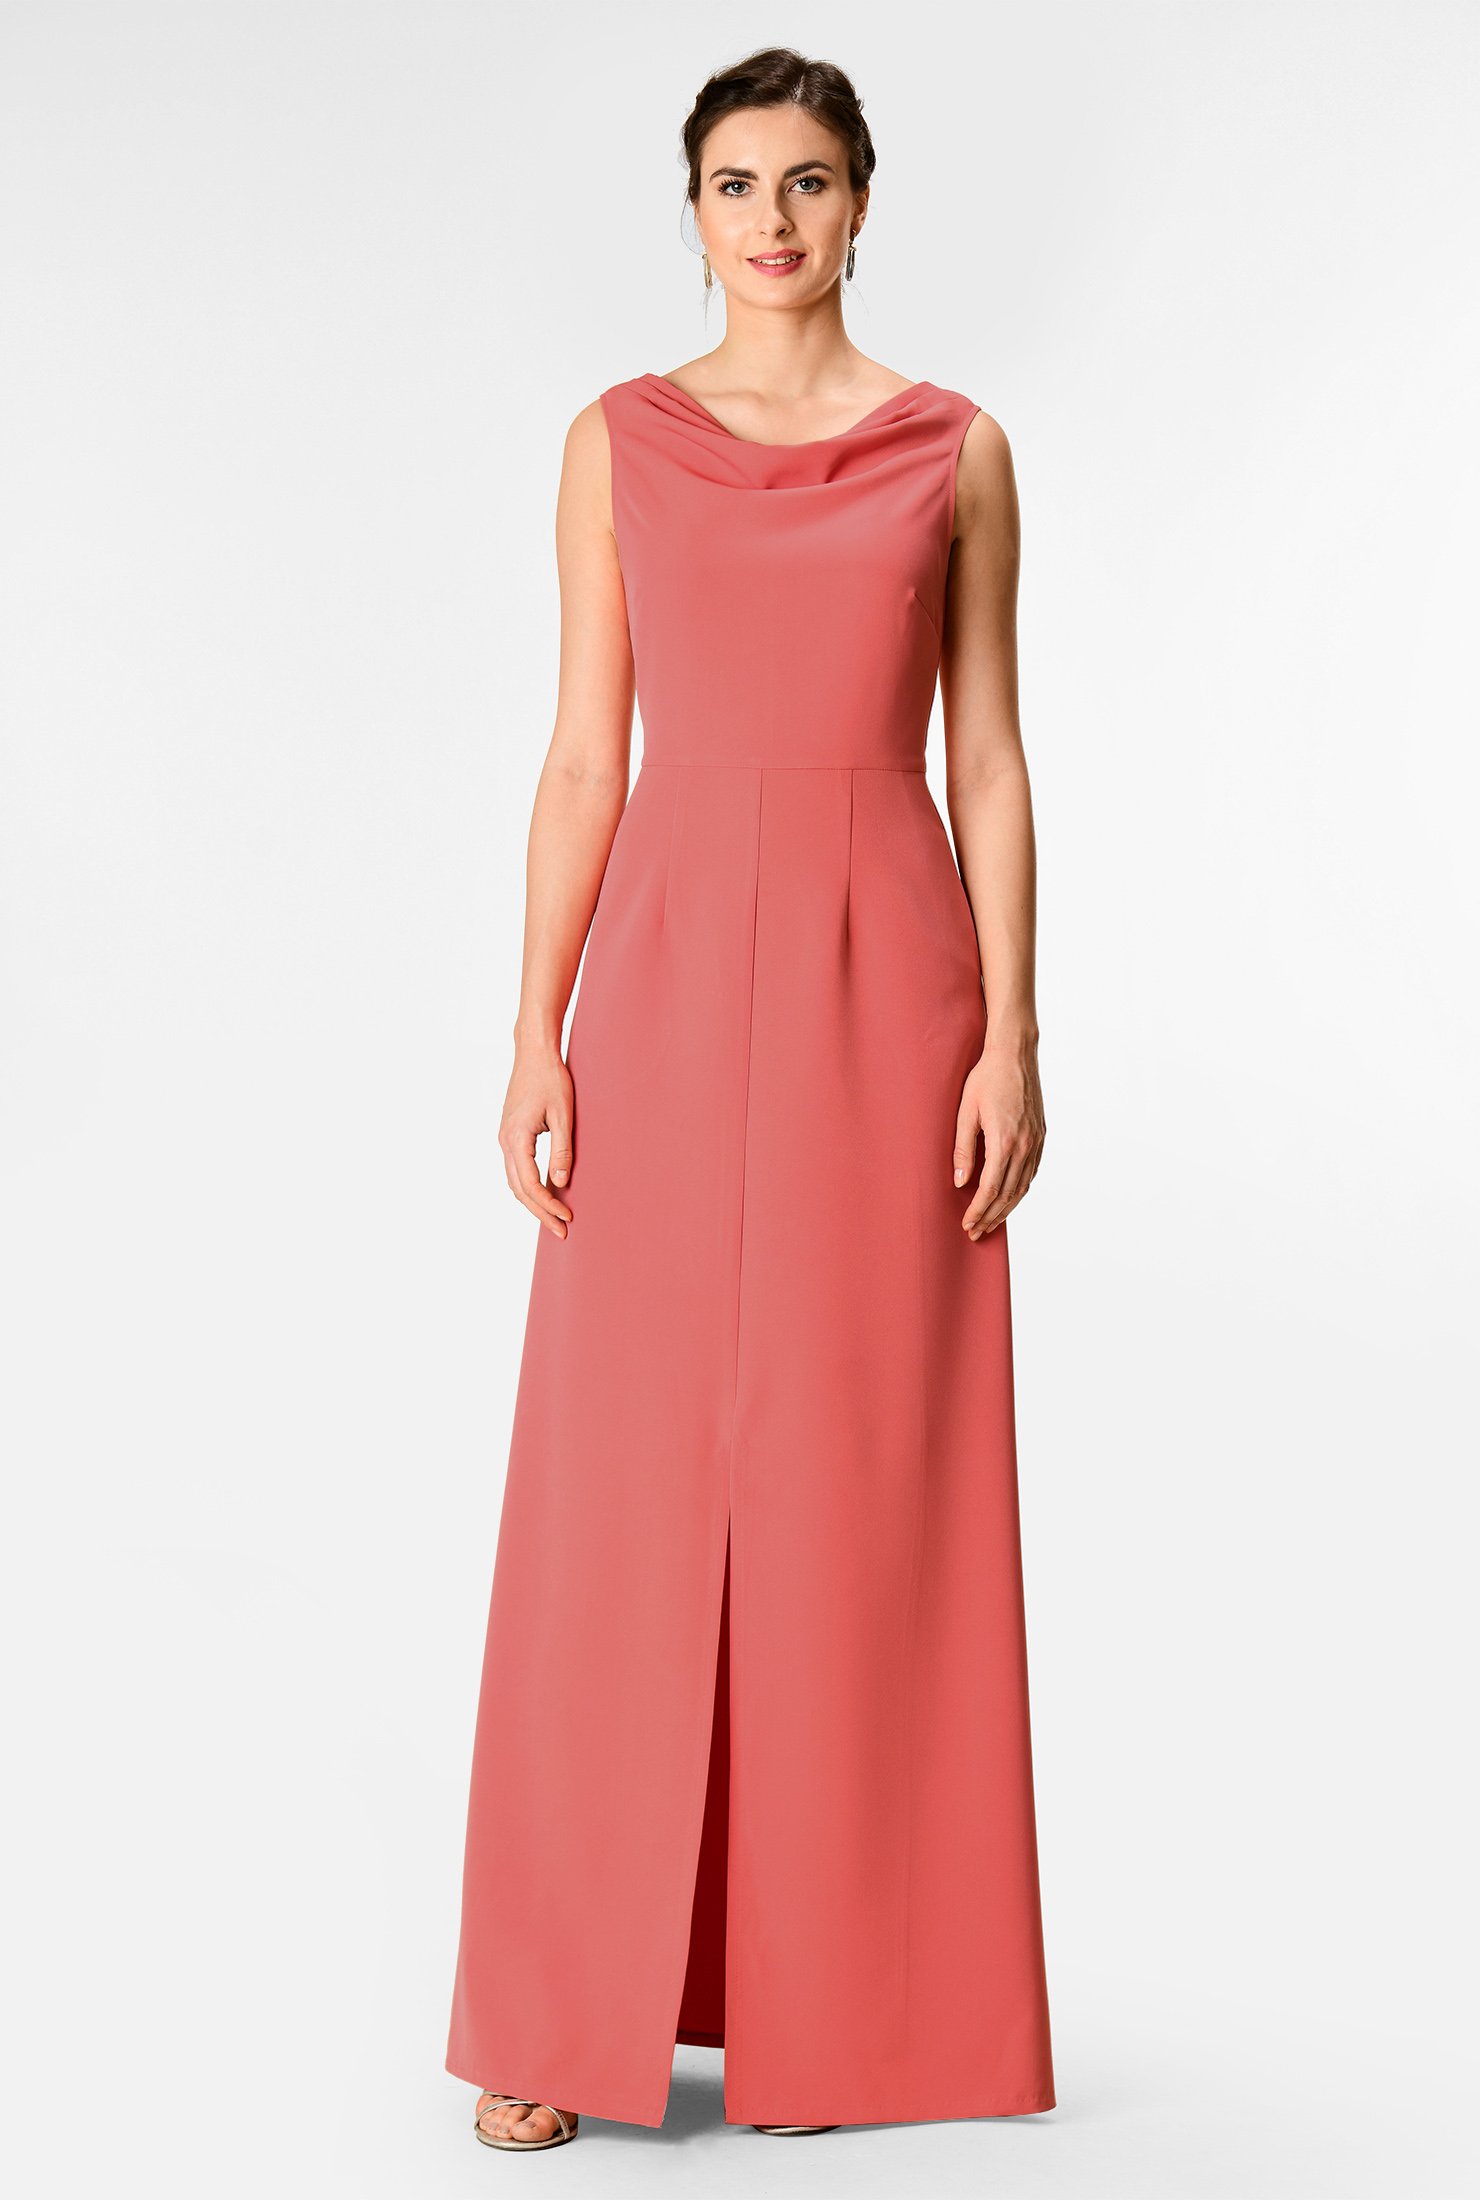 Fit-and-flare styling sculpts flattering shape in our vibrant crepe dress detailed with a cowl neck and a flirty high front vent to show off those suntanned legs.